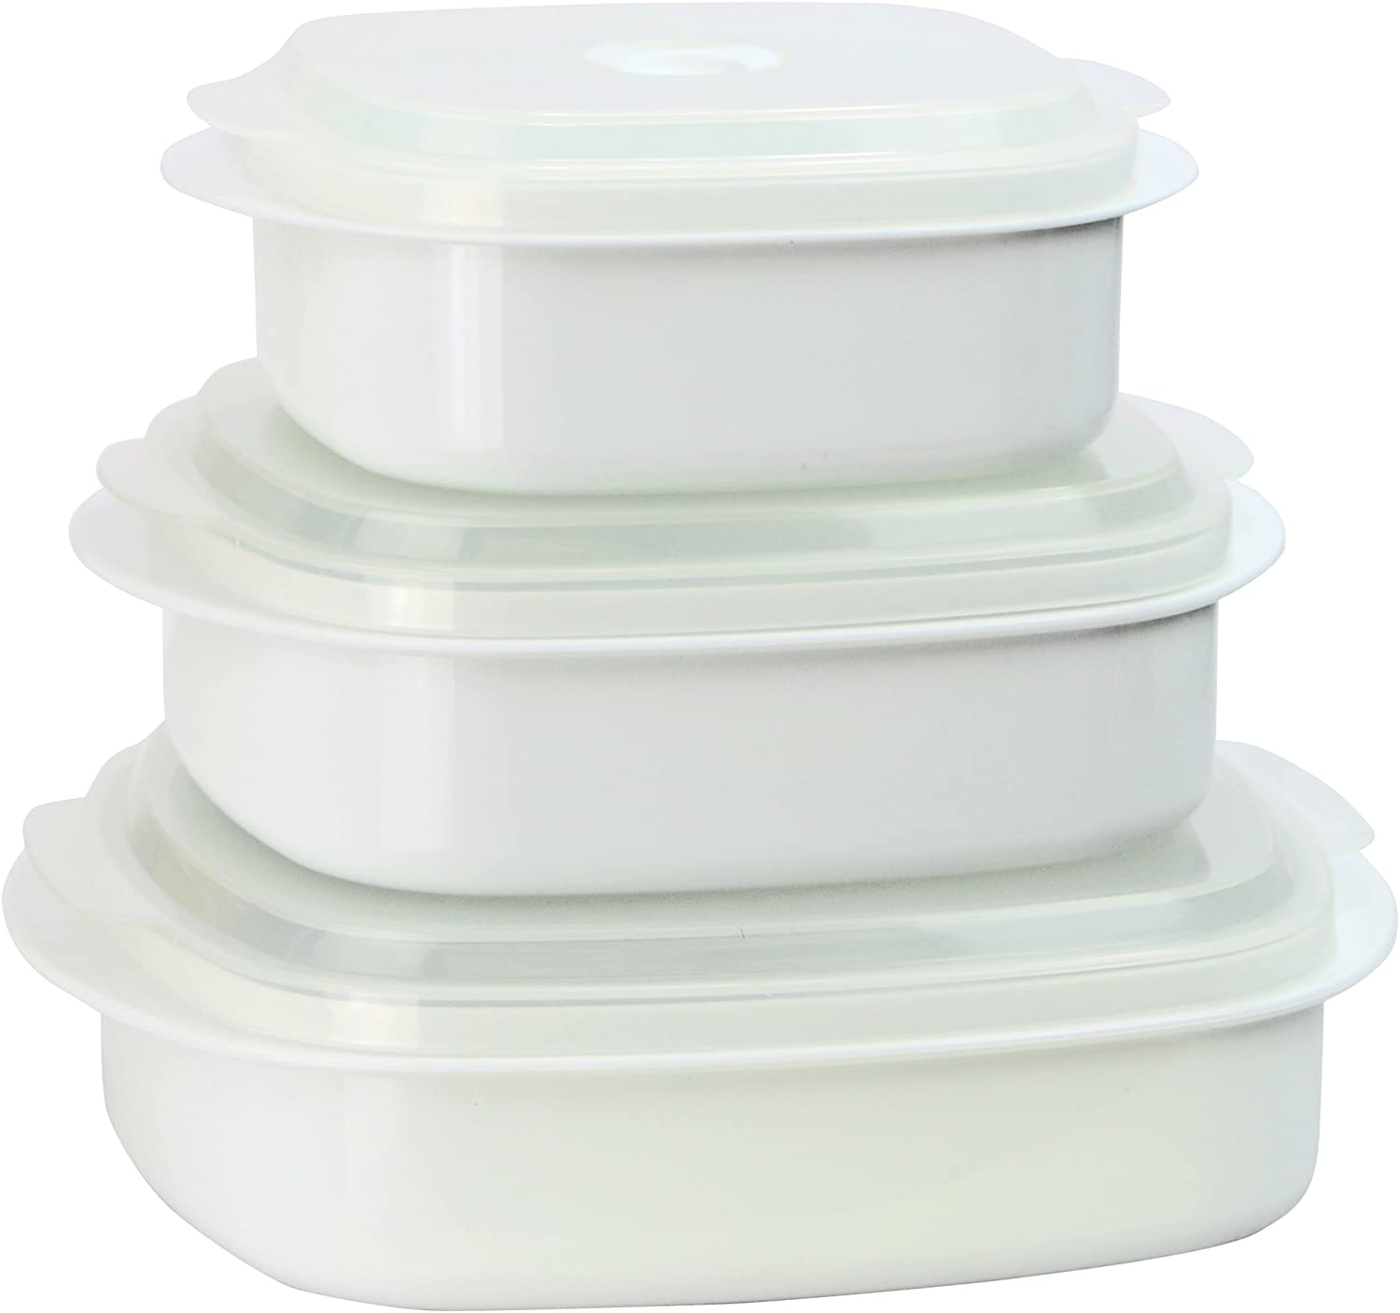 Calypso Basics by Reston Lloyd 6-Piece Microwave Cookware, Steamer and Storage Set, White